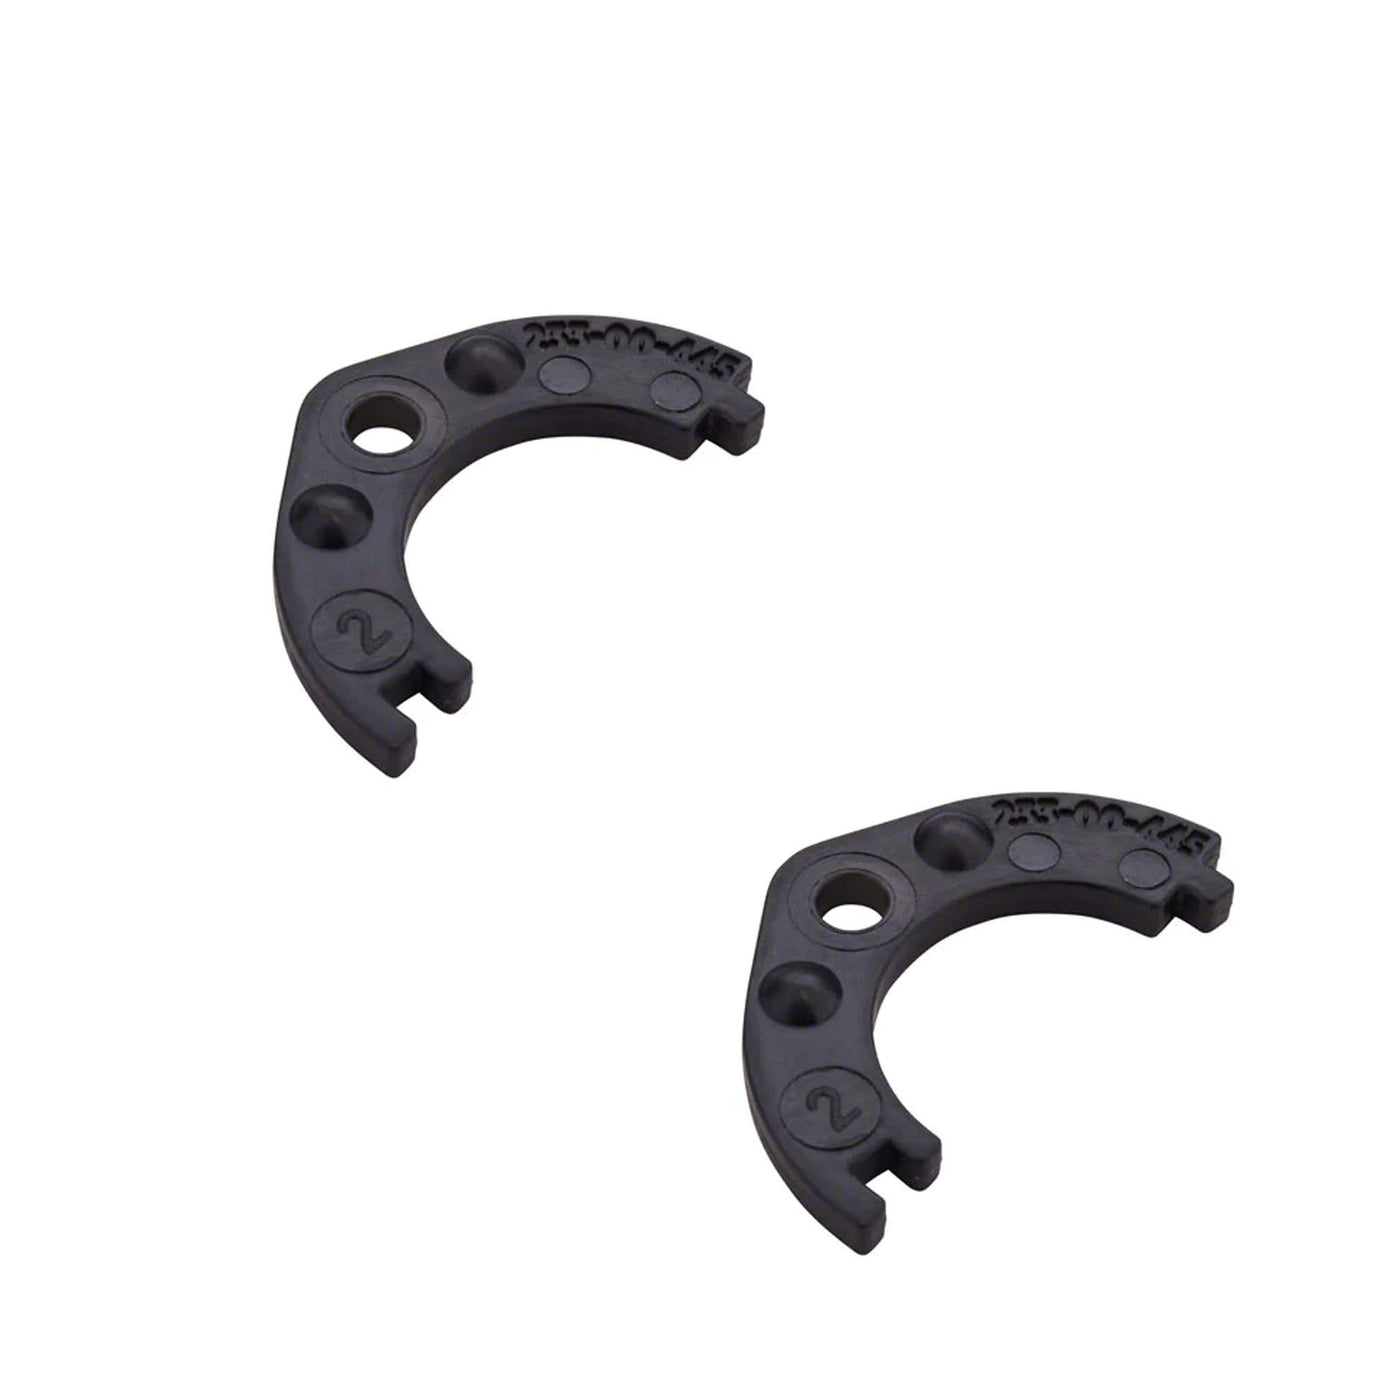 Fox DHX Travel spacers